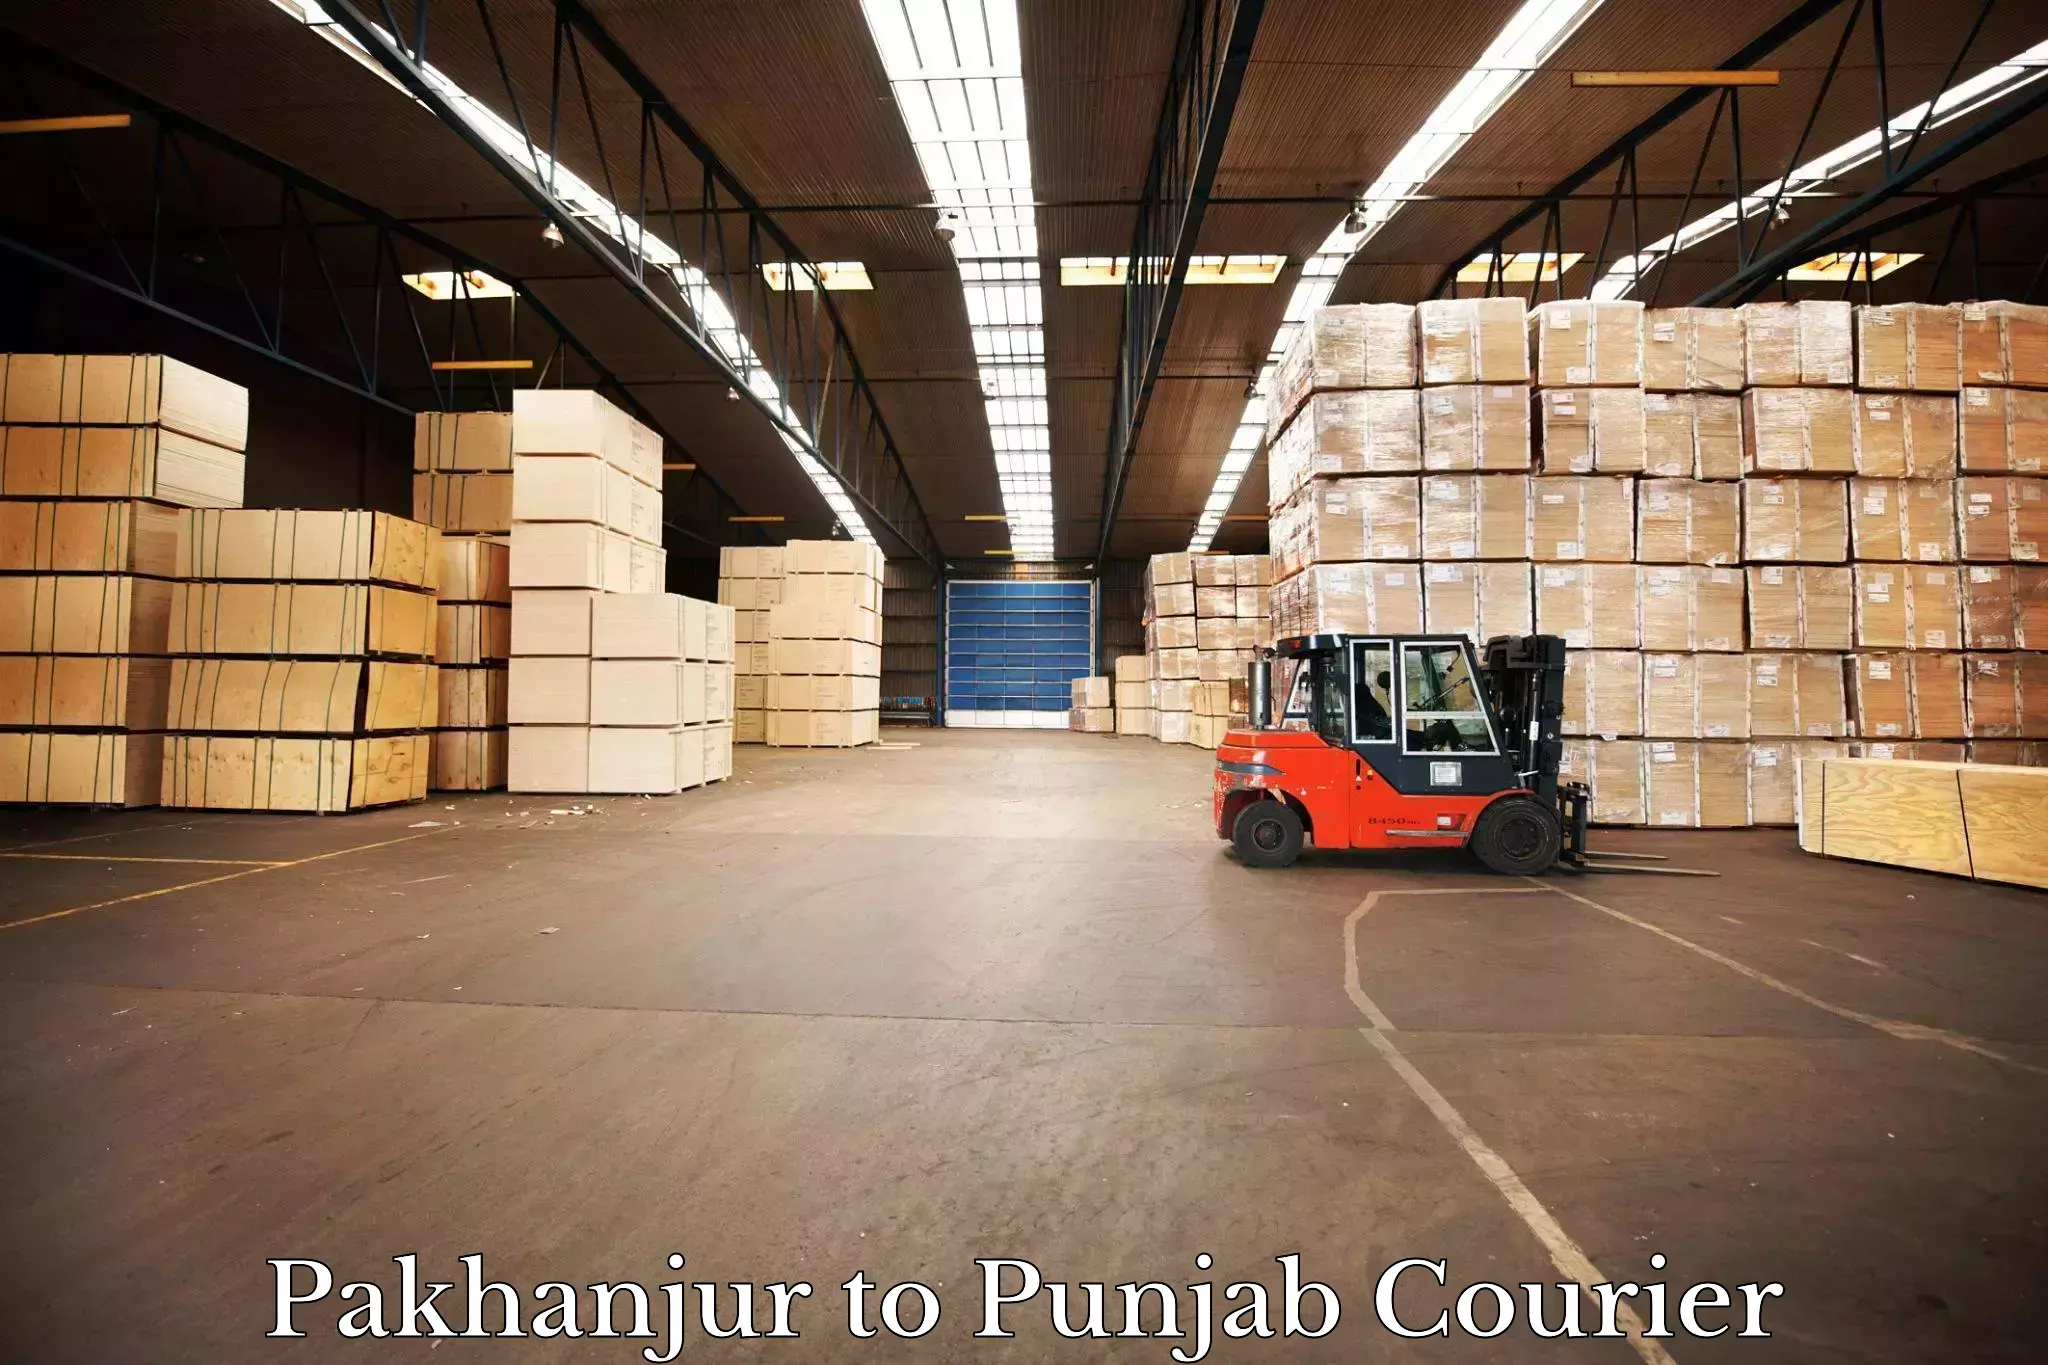 State-of-the-art courier technology Pakhanjur to Punjab